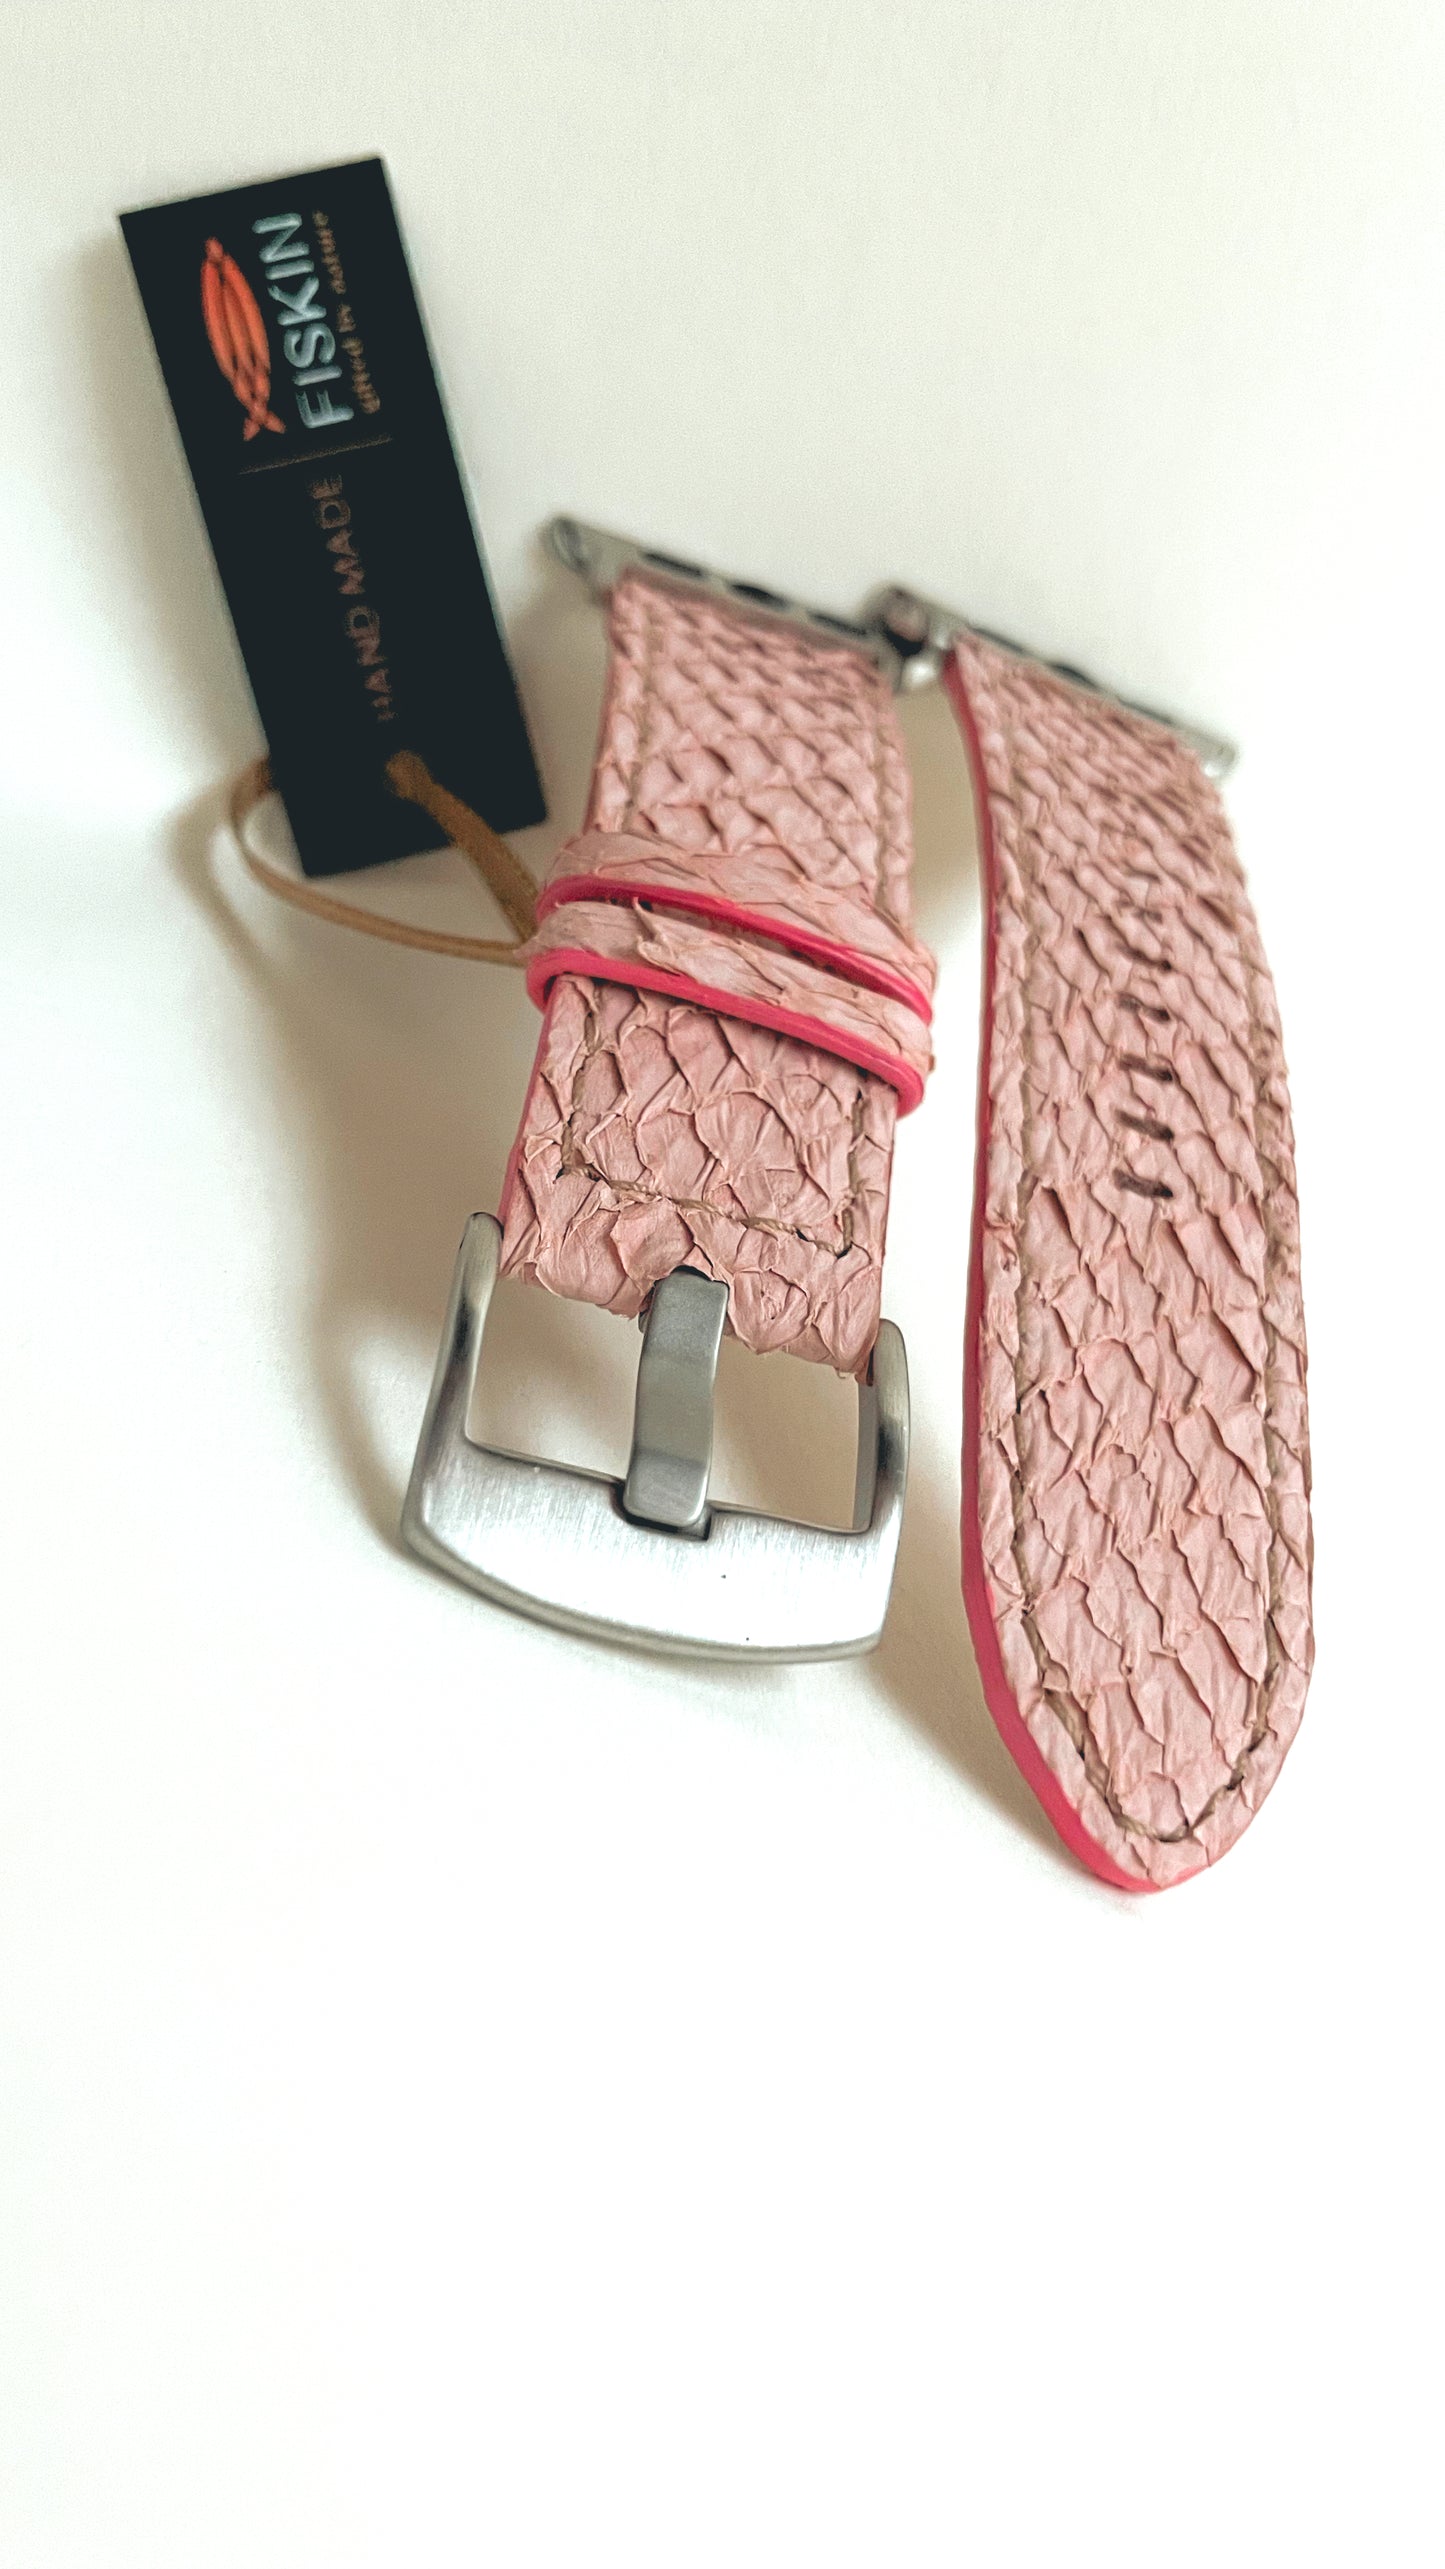 Watch strap for apple watch, sustainable salmon leather, powder touch